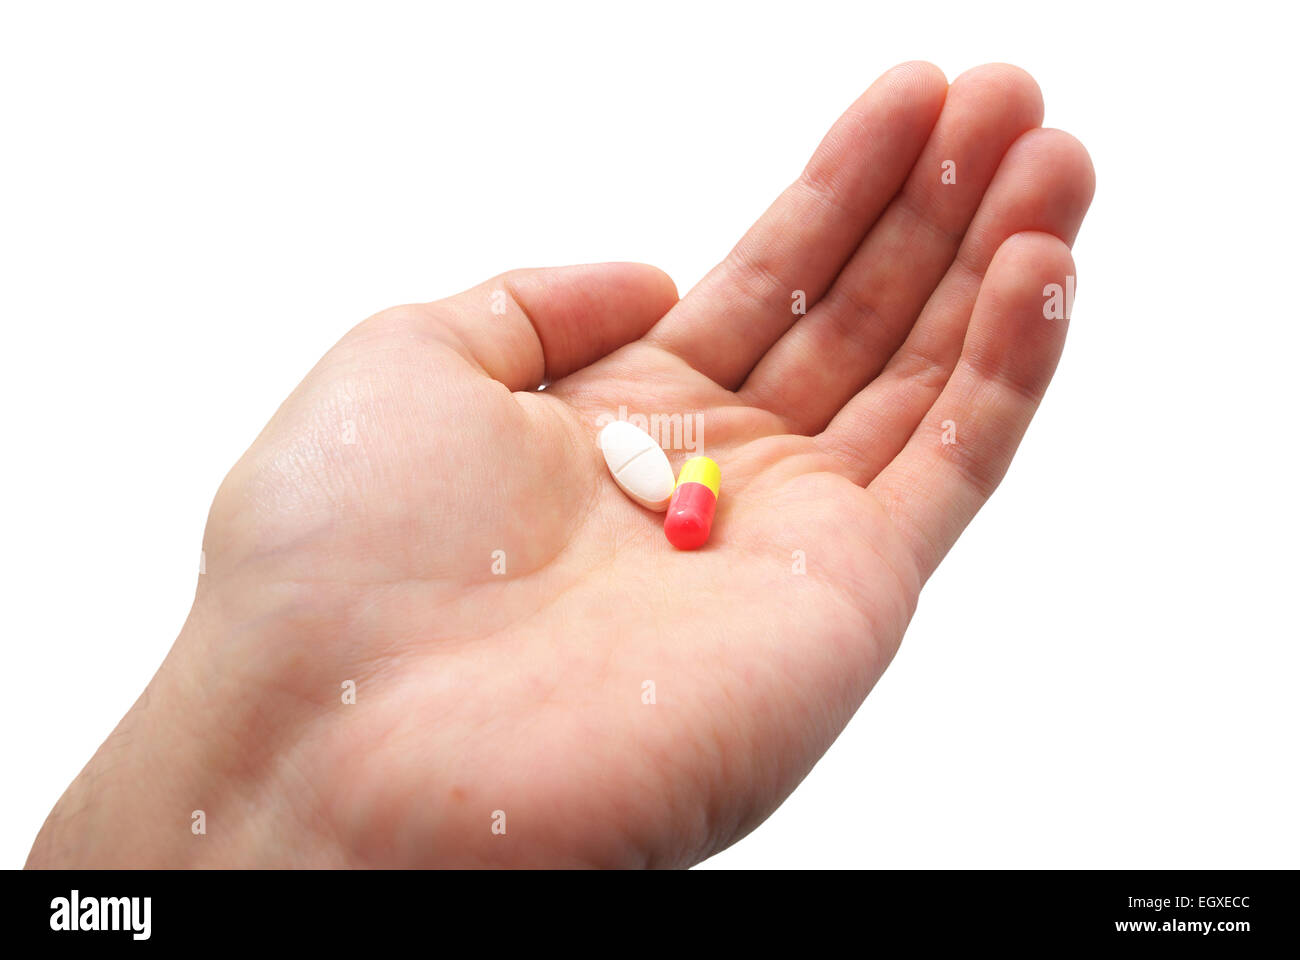 Human palm and two pills. Isolated object. Stock Photo